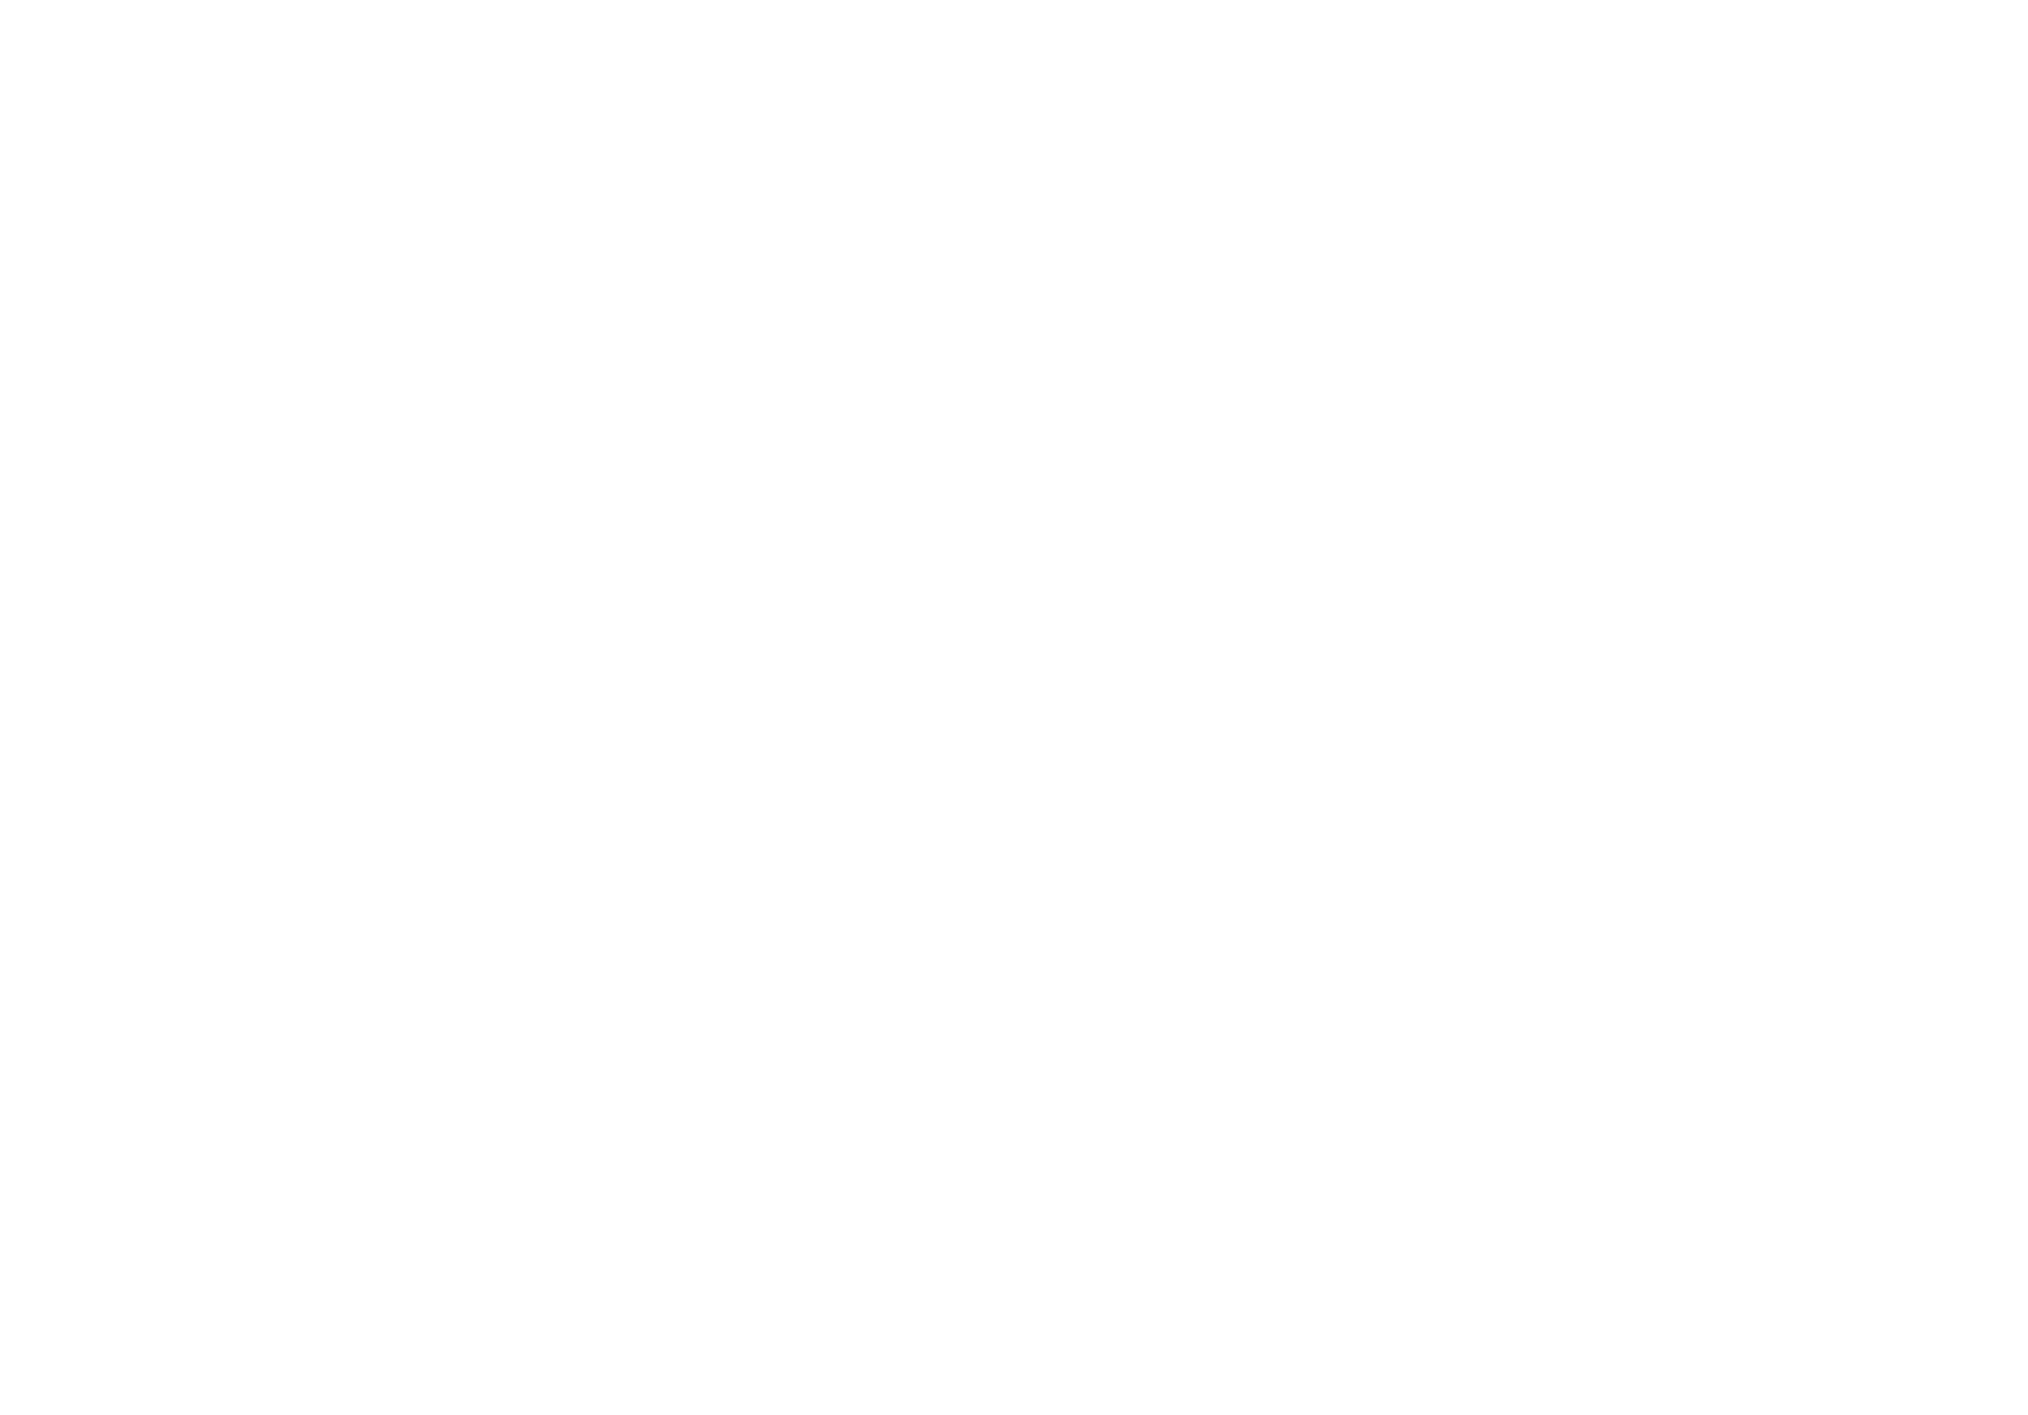 Edencrest at The Legacy